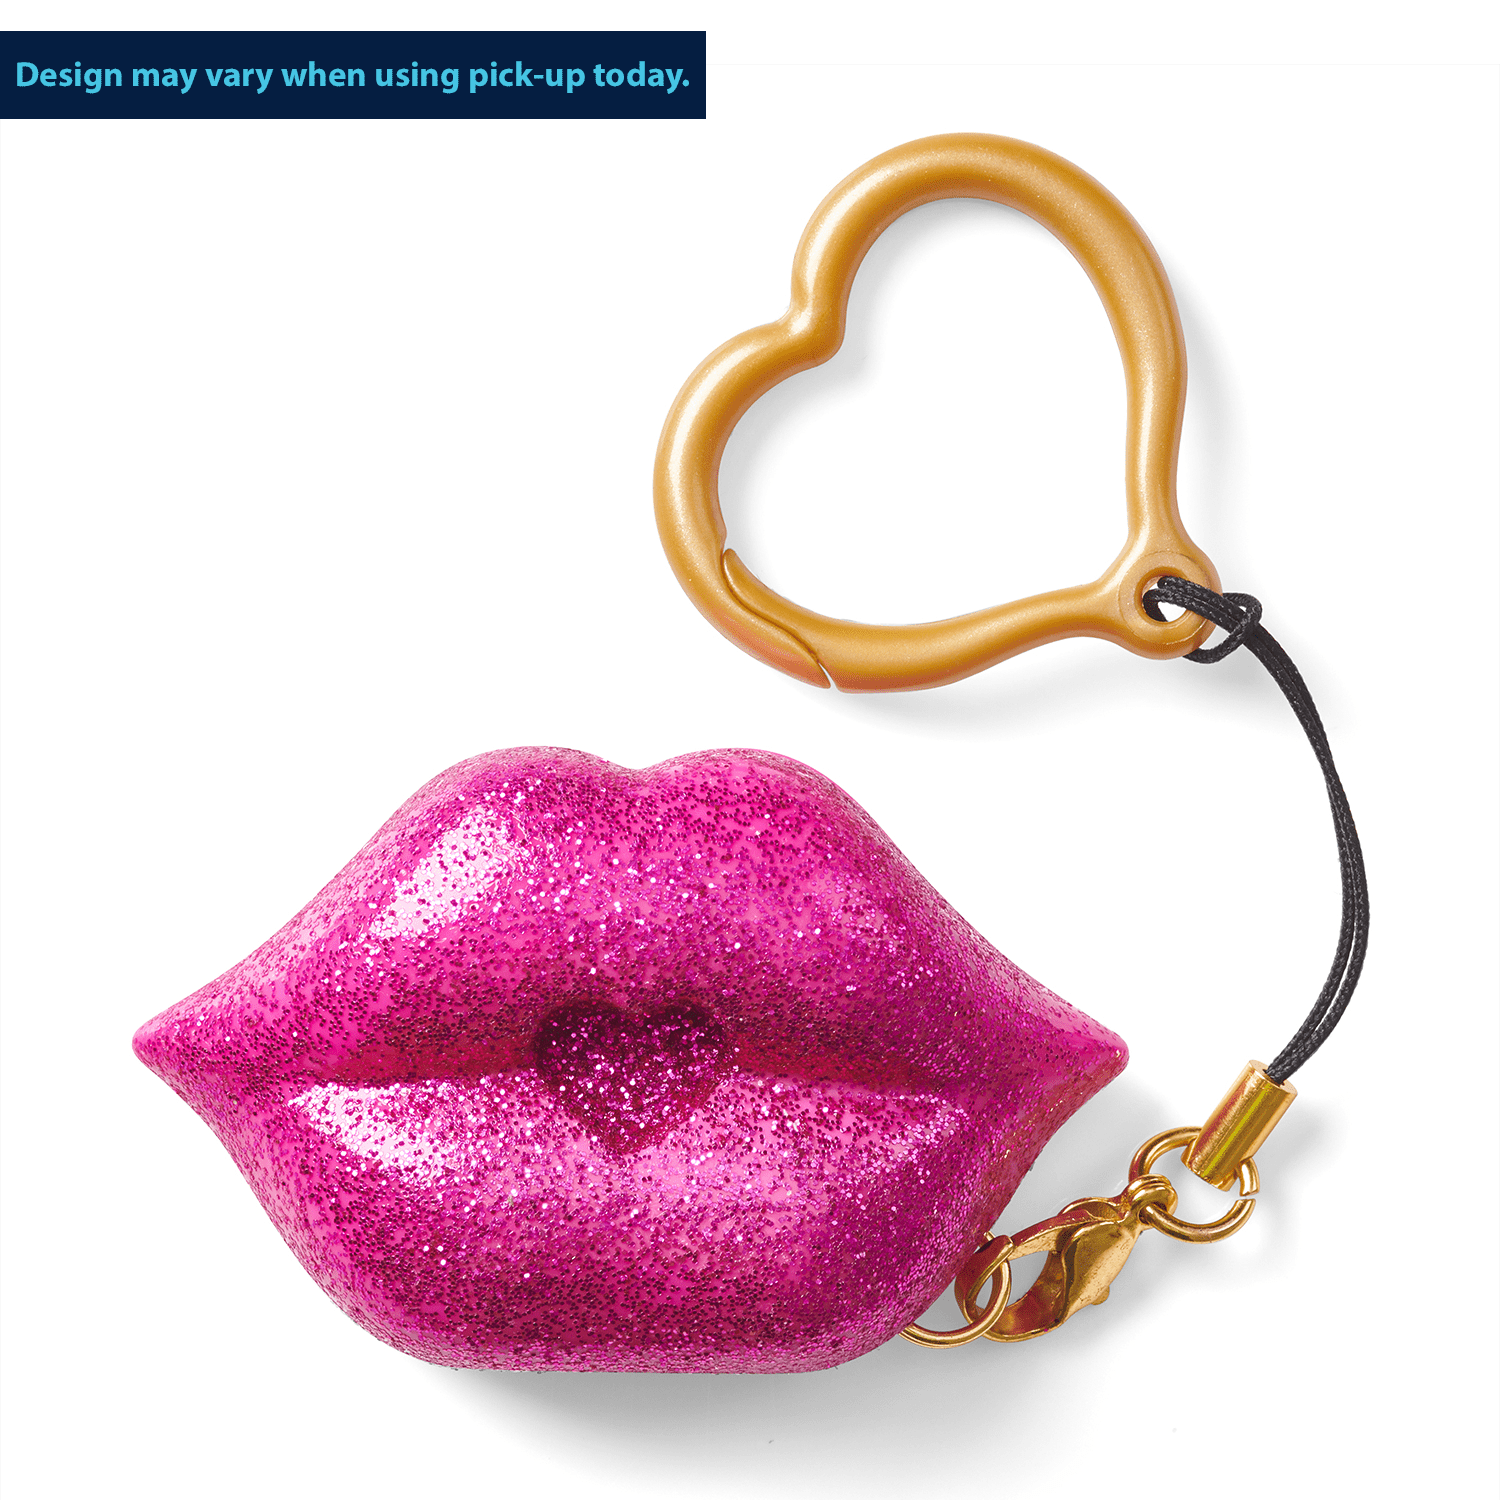 S.W.A.K. Interactive Kissable Key Chain – Glimmer Kiss By WowWee - Walmart.com